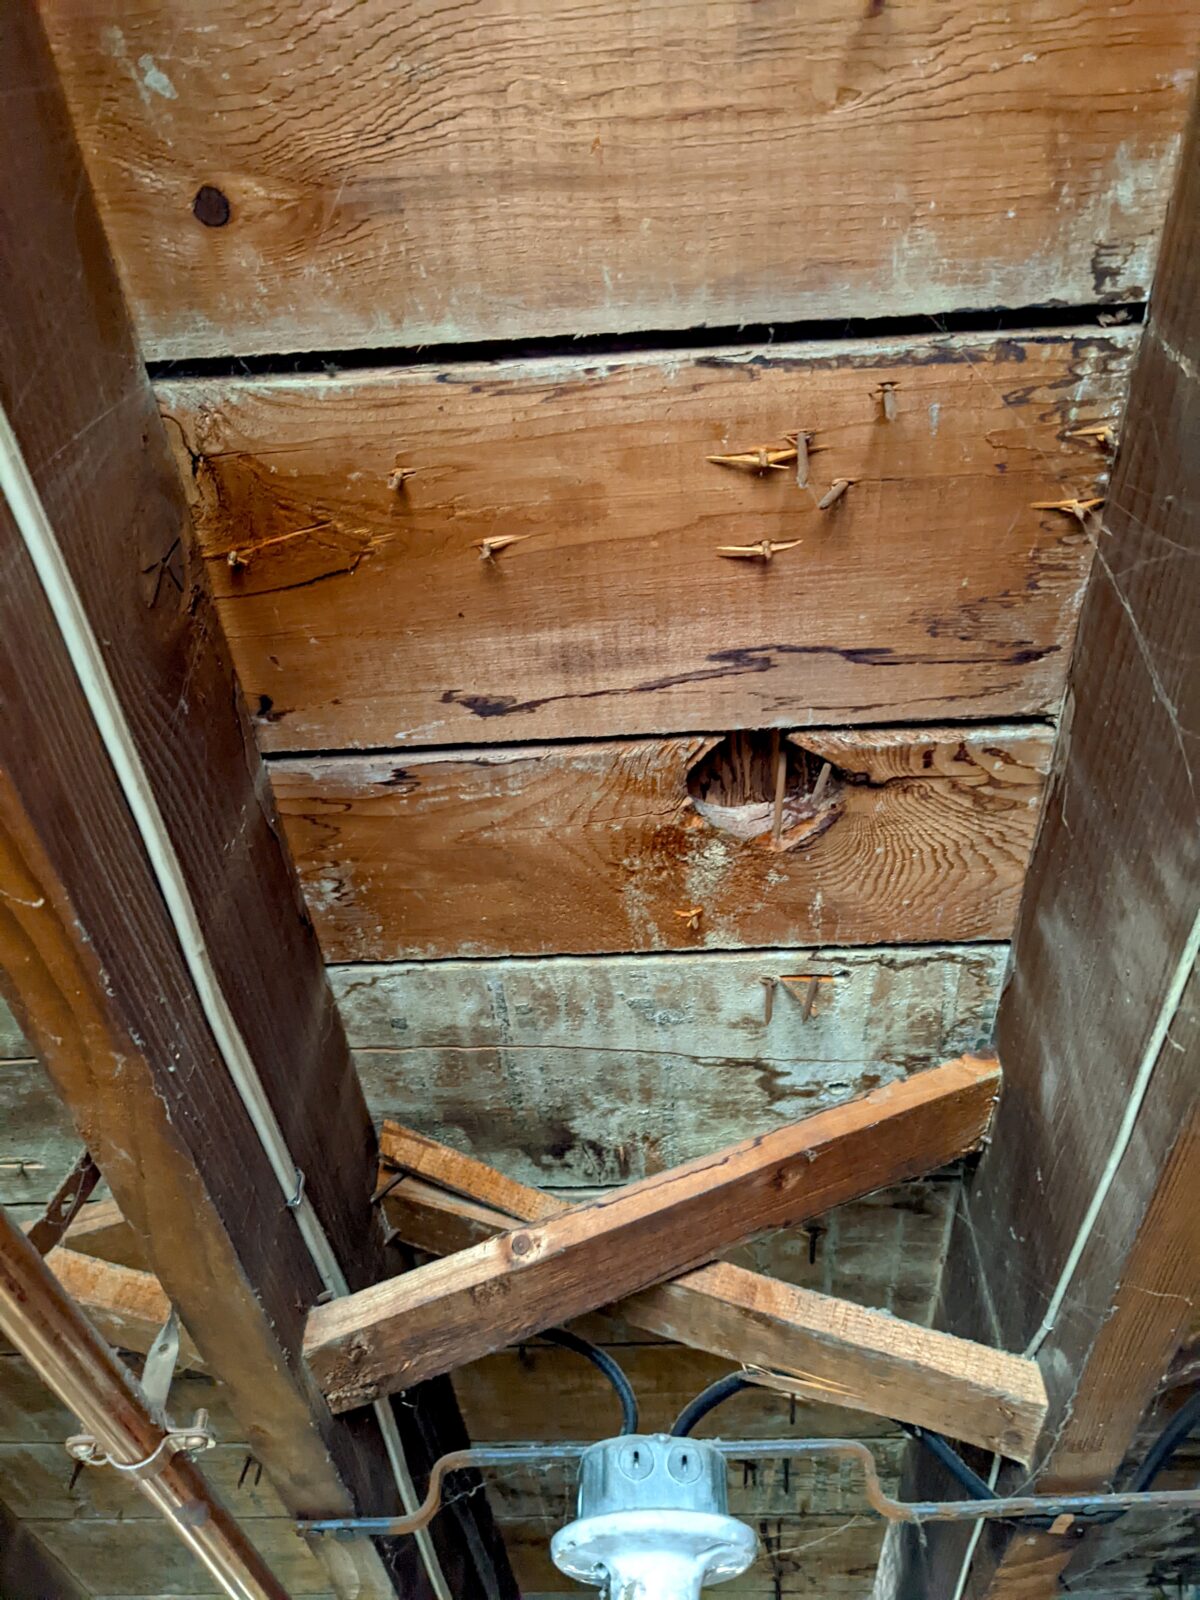 How could the underside of the original subfloor in this old house be stained by concrete? You’ll be amazed to discover the answer. (Courtesy to Tim Carter/TNS)